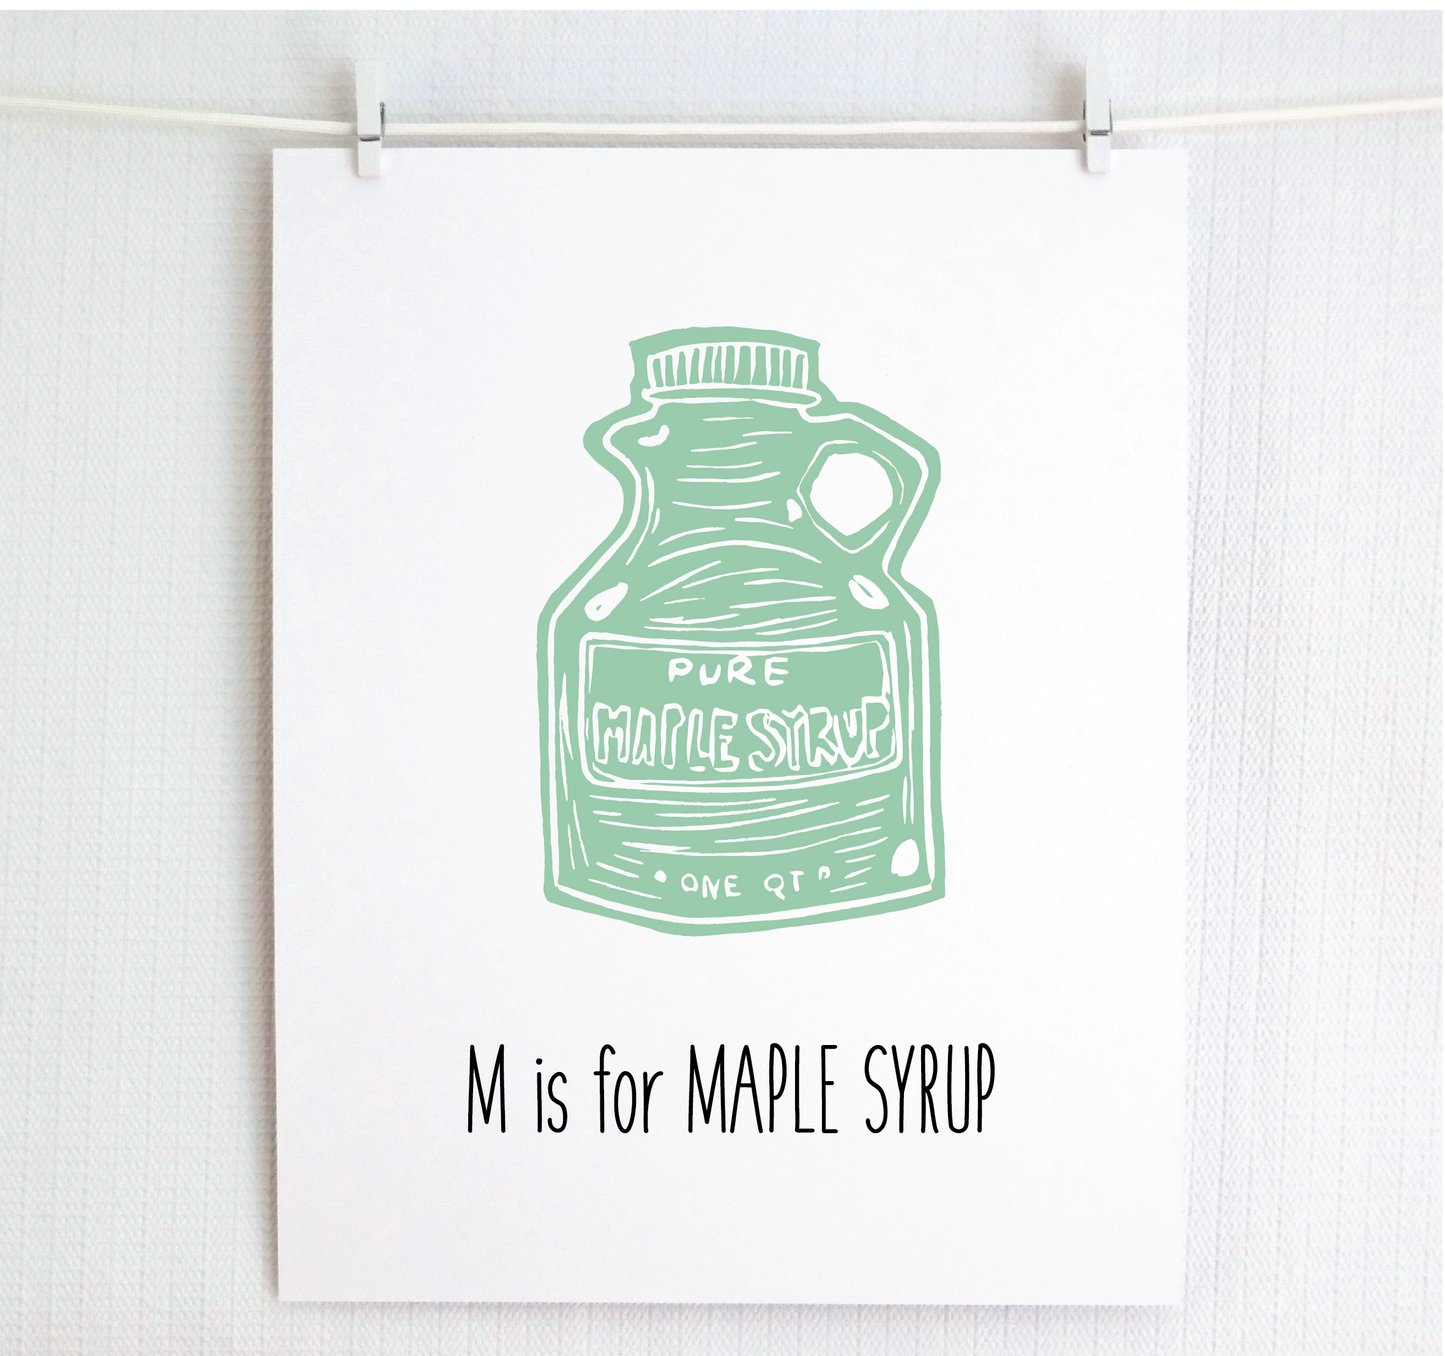 M is for Maple Syrup